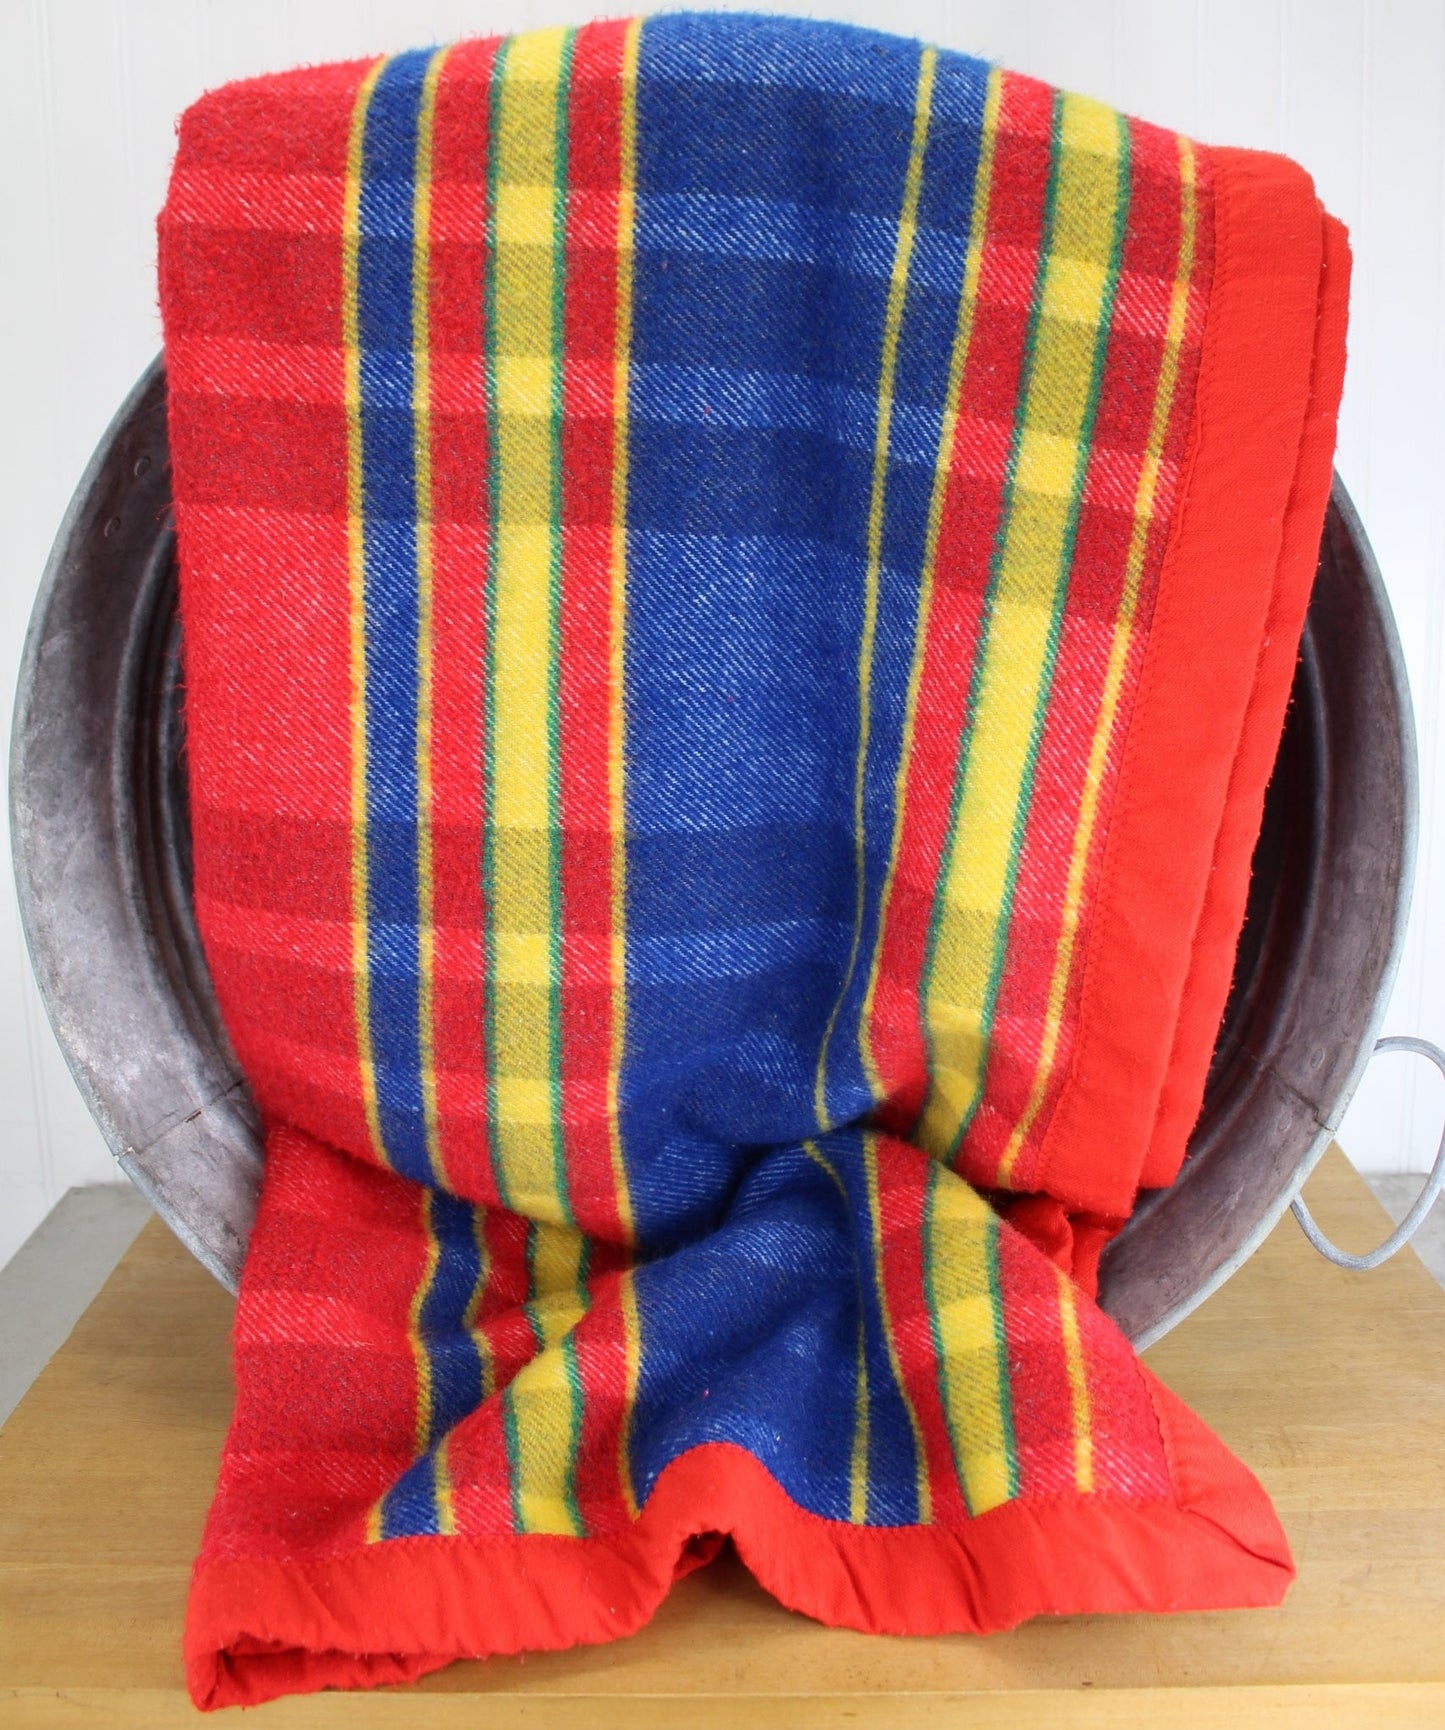 Unbranded Acrylic Blanket France - Primary Bright Colors Heavy Weight - 91" X 80" red yellow blue